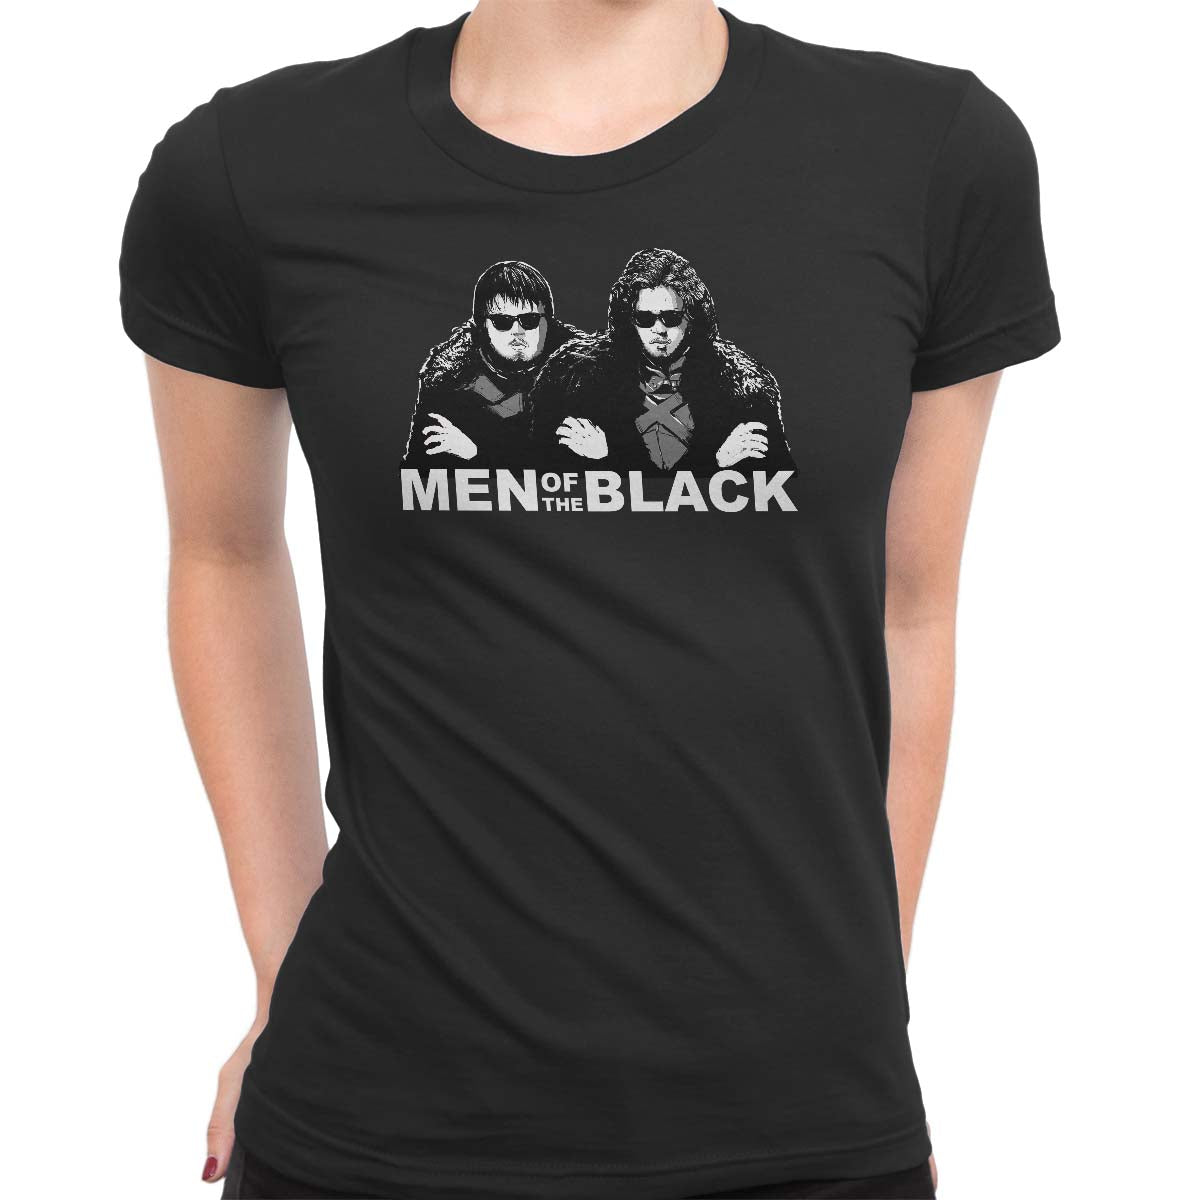 Men of the Black Women's Classic Fitted Tee